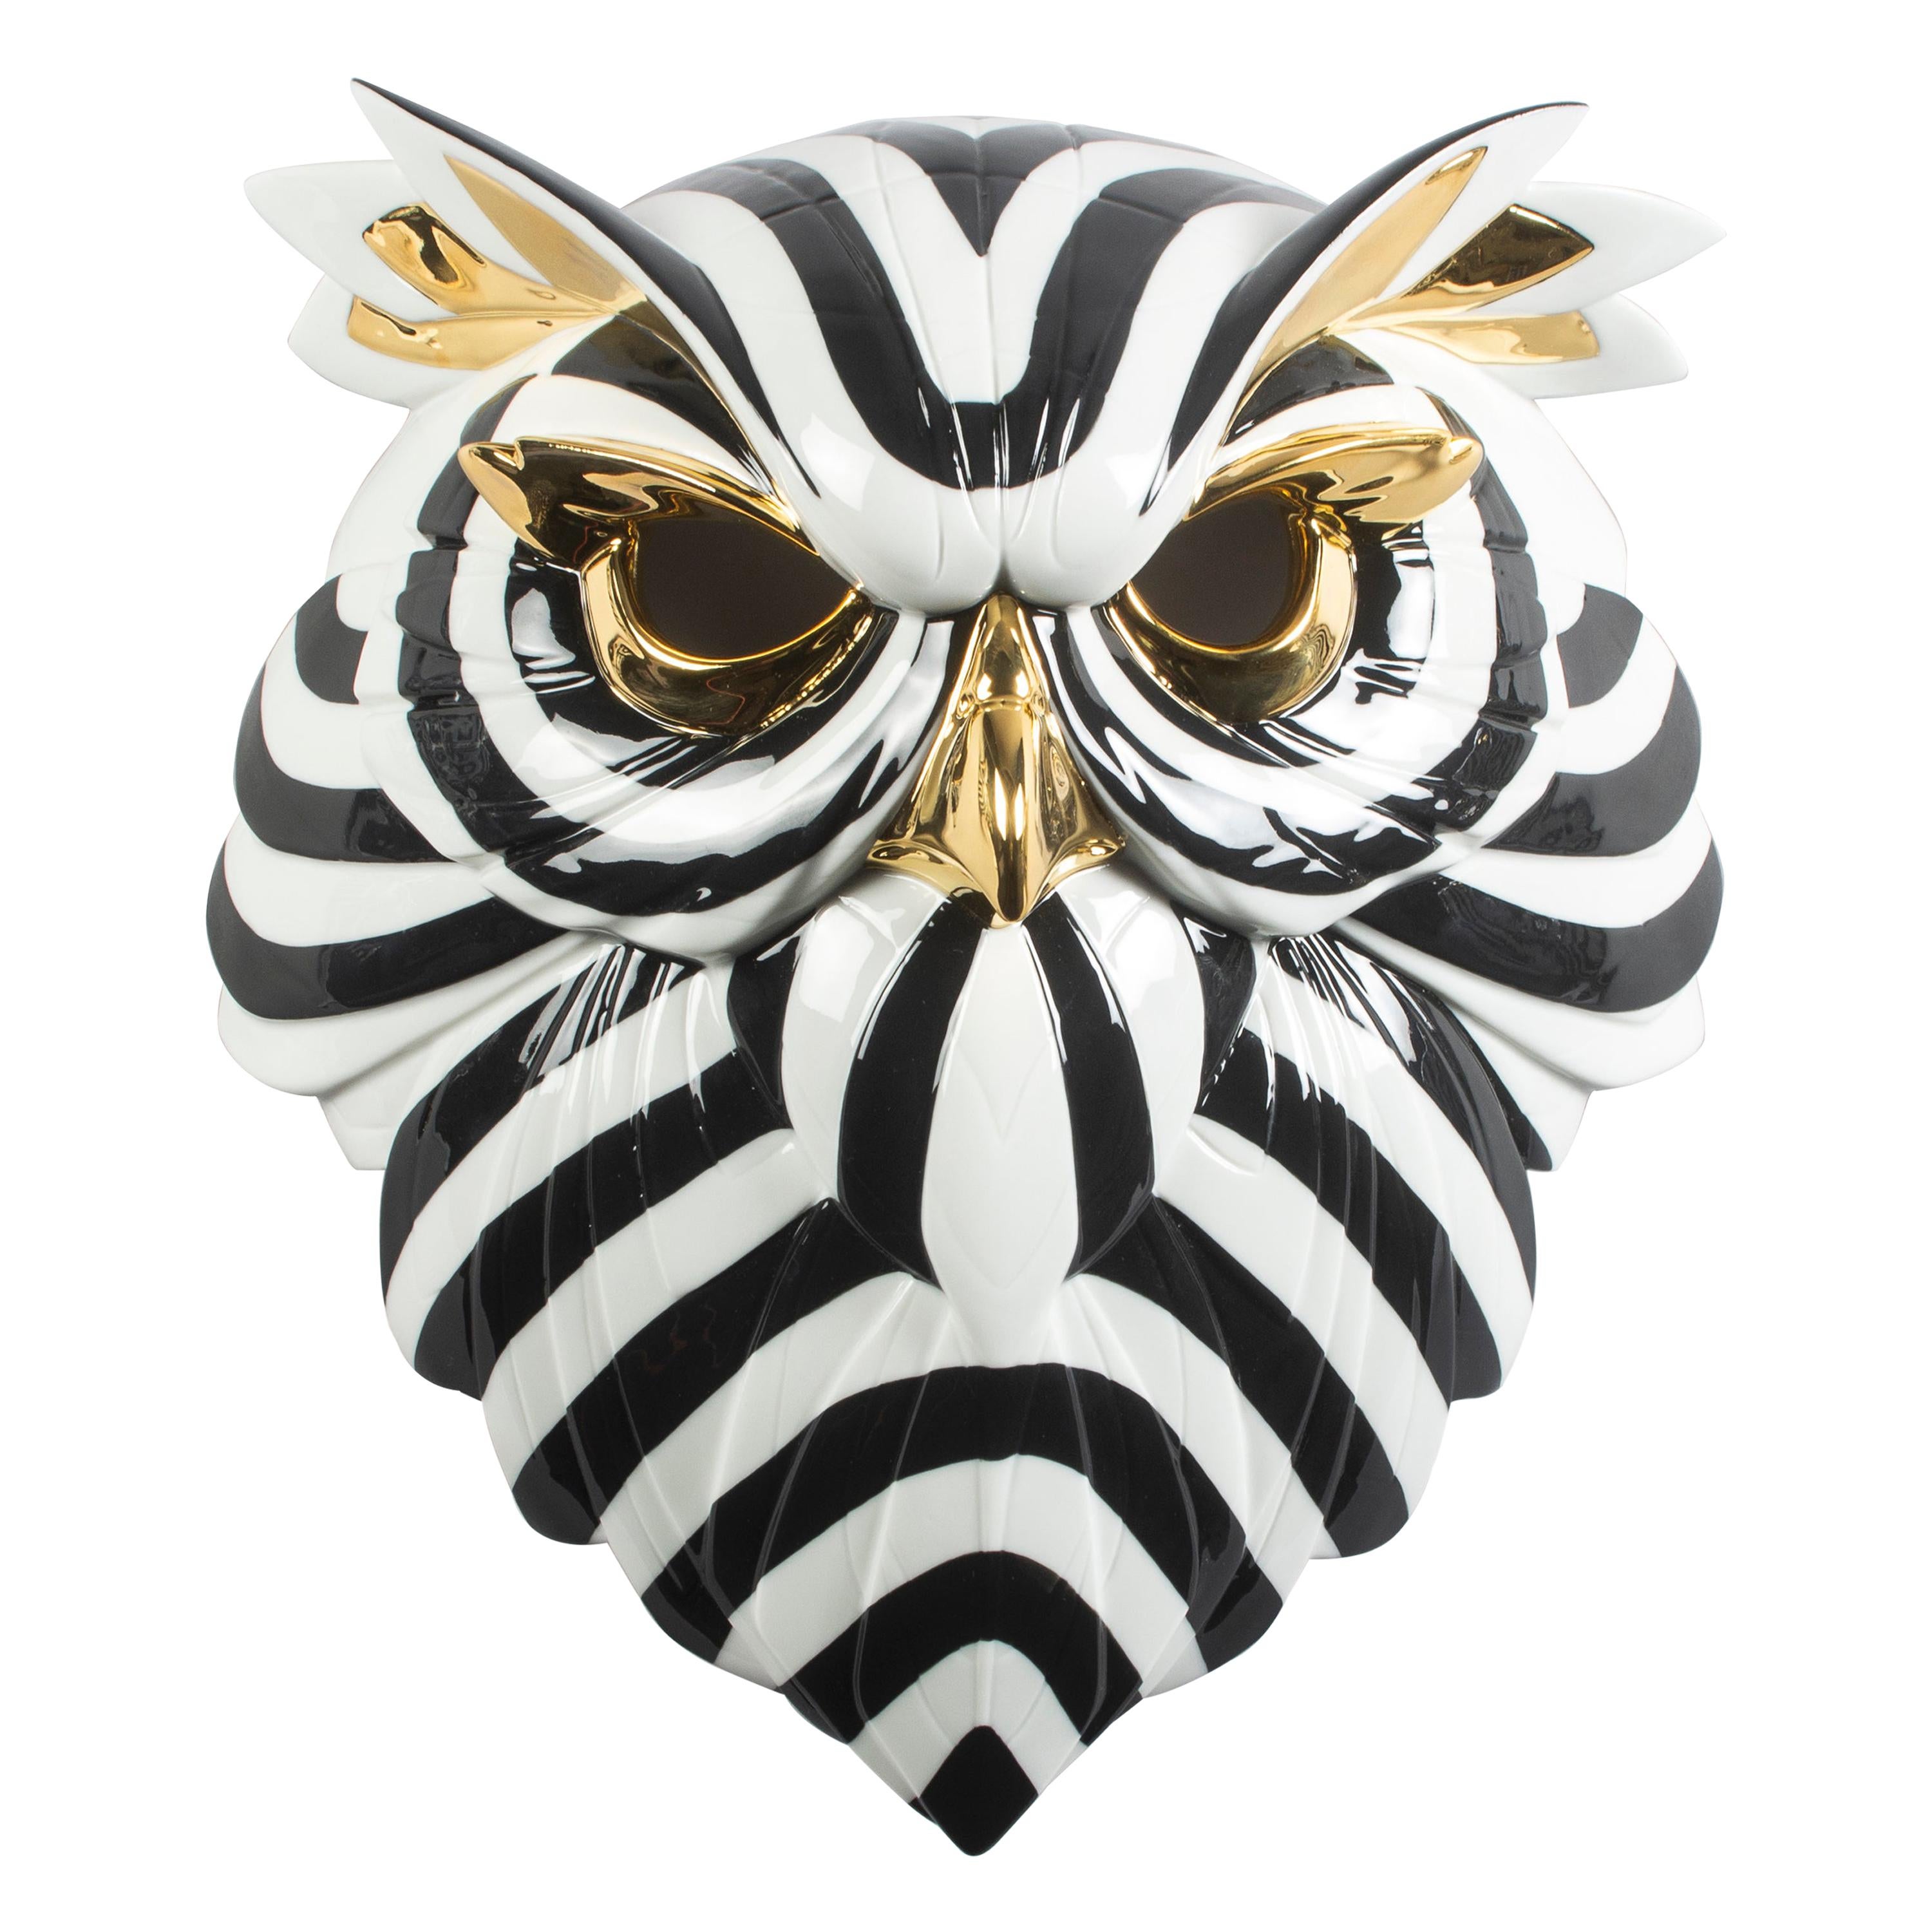 Lladró Owl Mask in Black and Gold by José Luis Santes